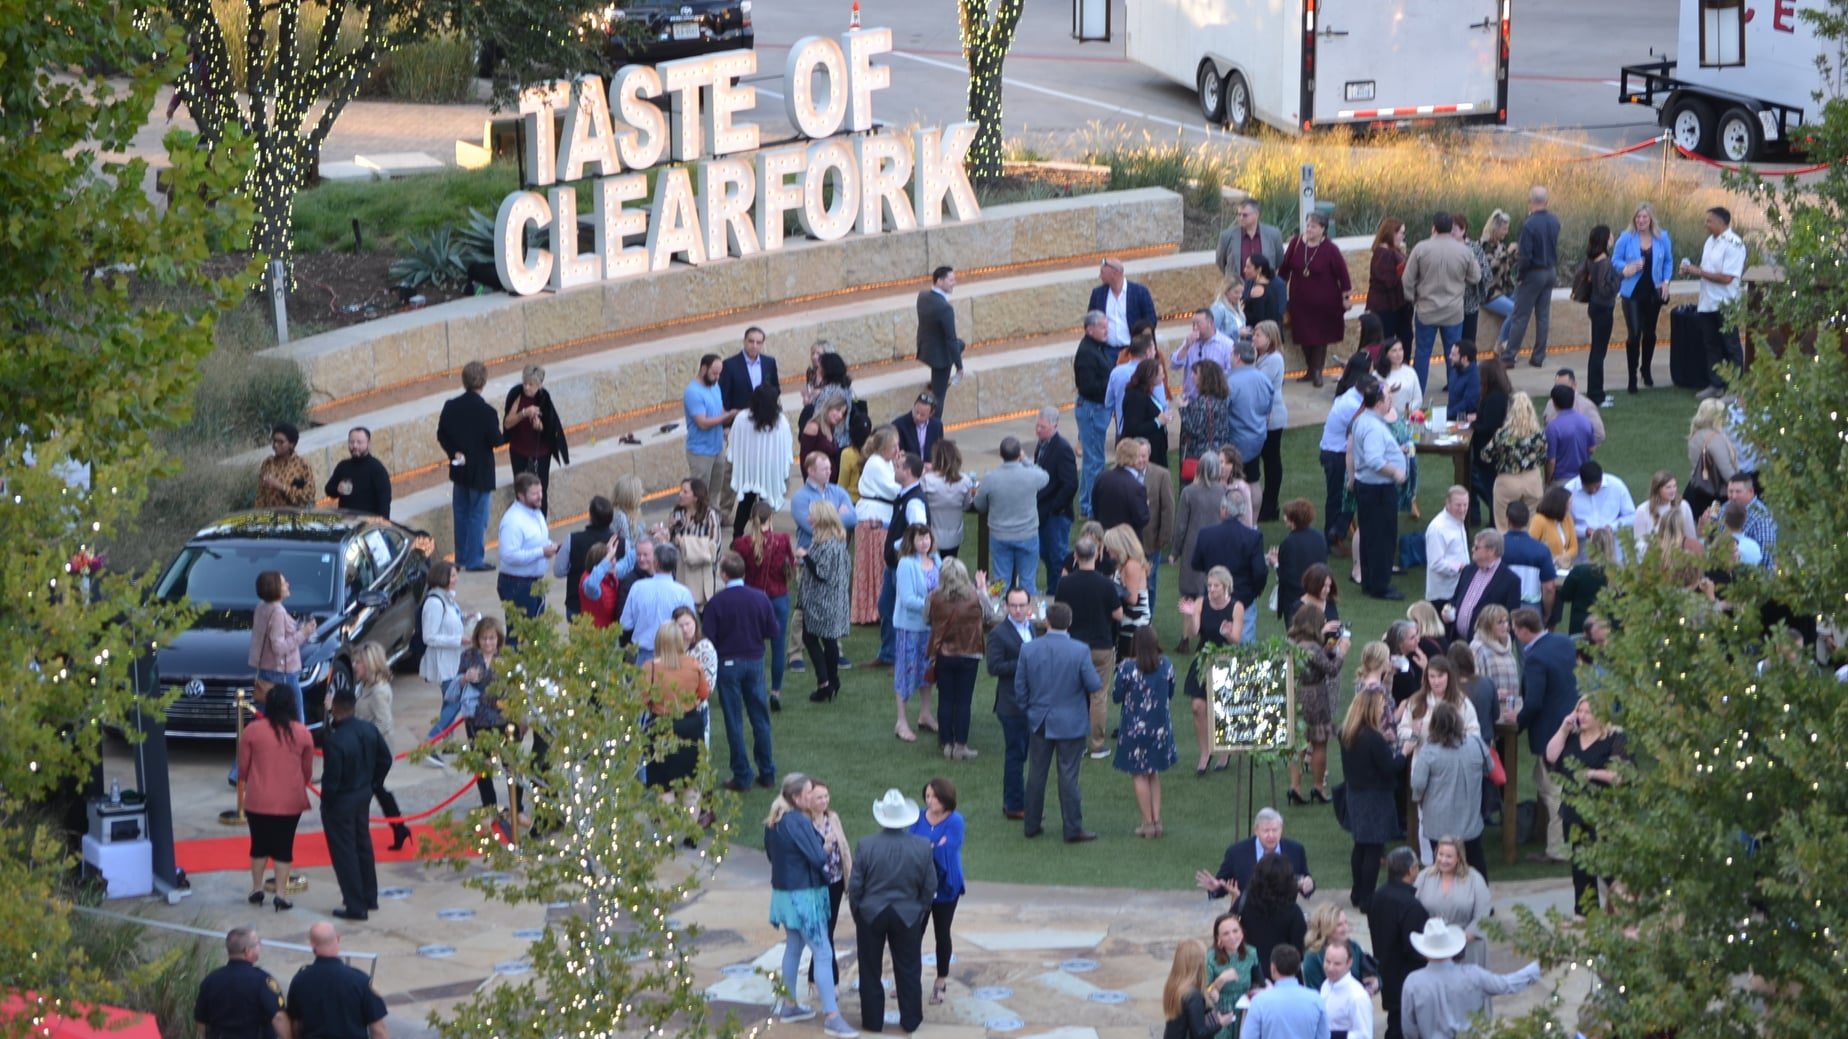 Fort Worth's Taste of Clearfork Canceled Due to Effects of COVID-19  Pandemic – NBC 5 Dallas-Fort Worth